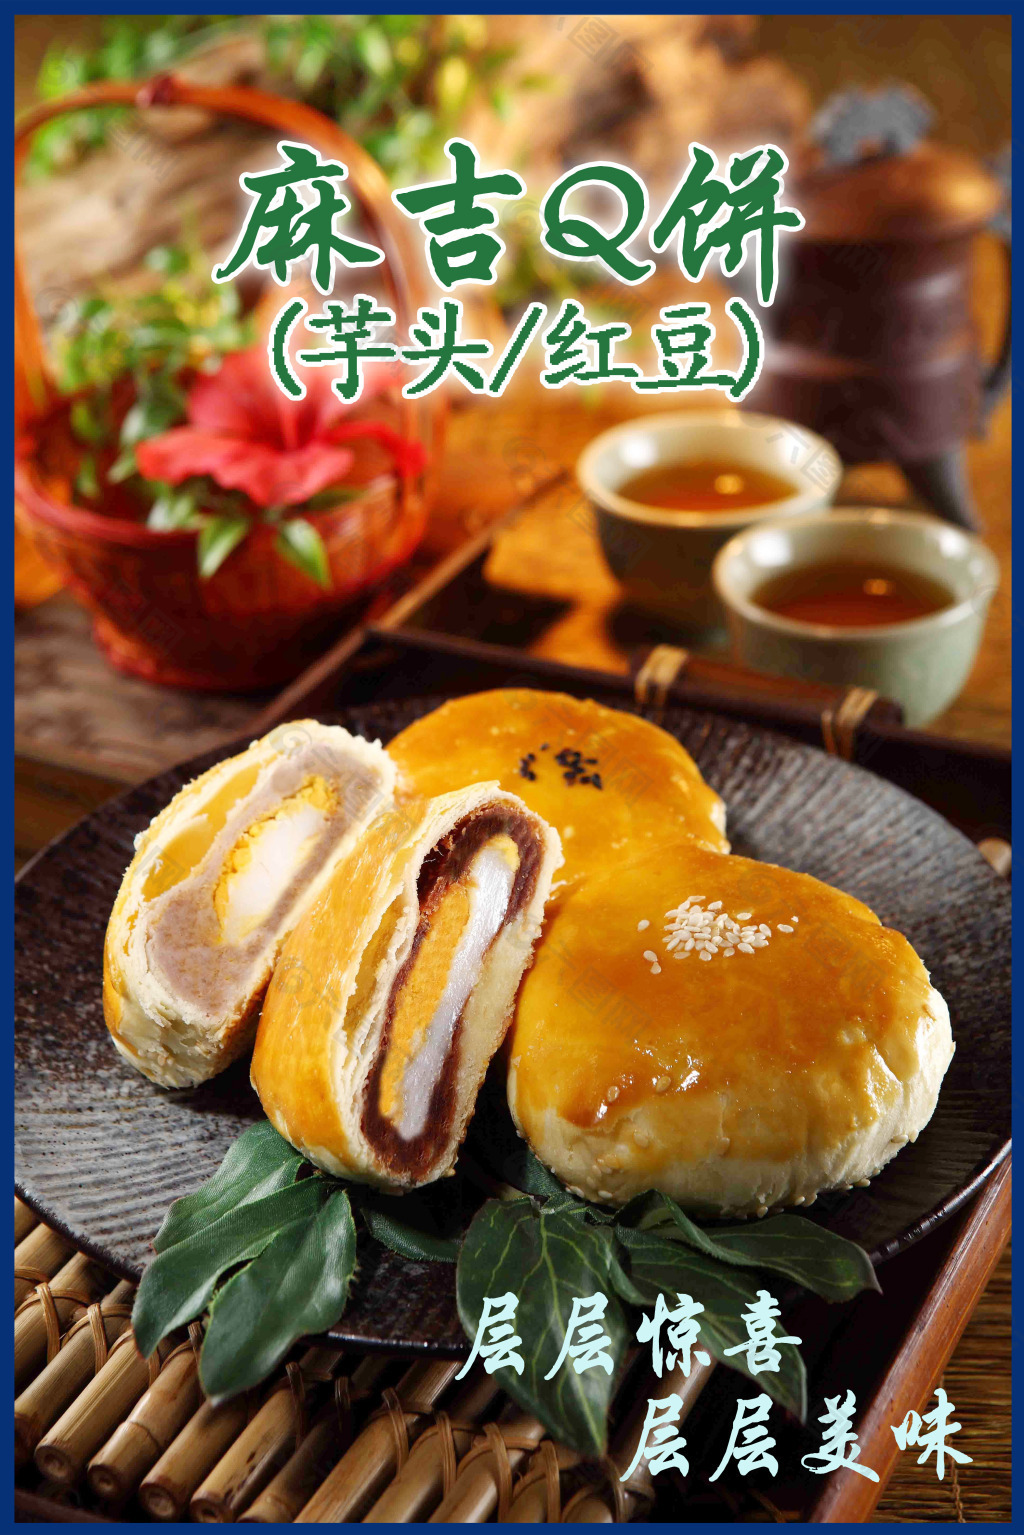 Grace's Blog 欣语心情: 台式香酥Q饼 Taiwanese 3Q Biscuit